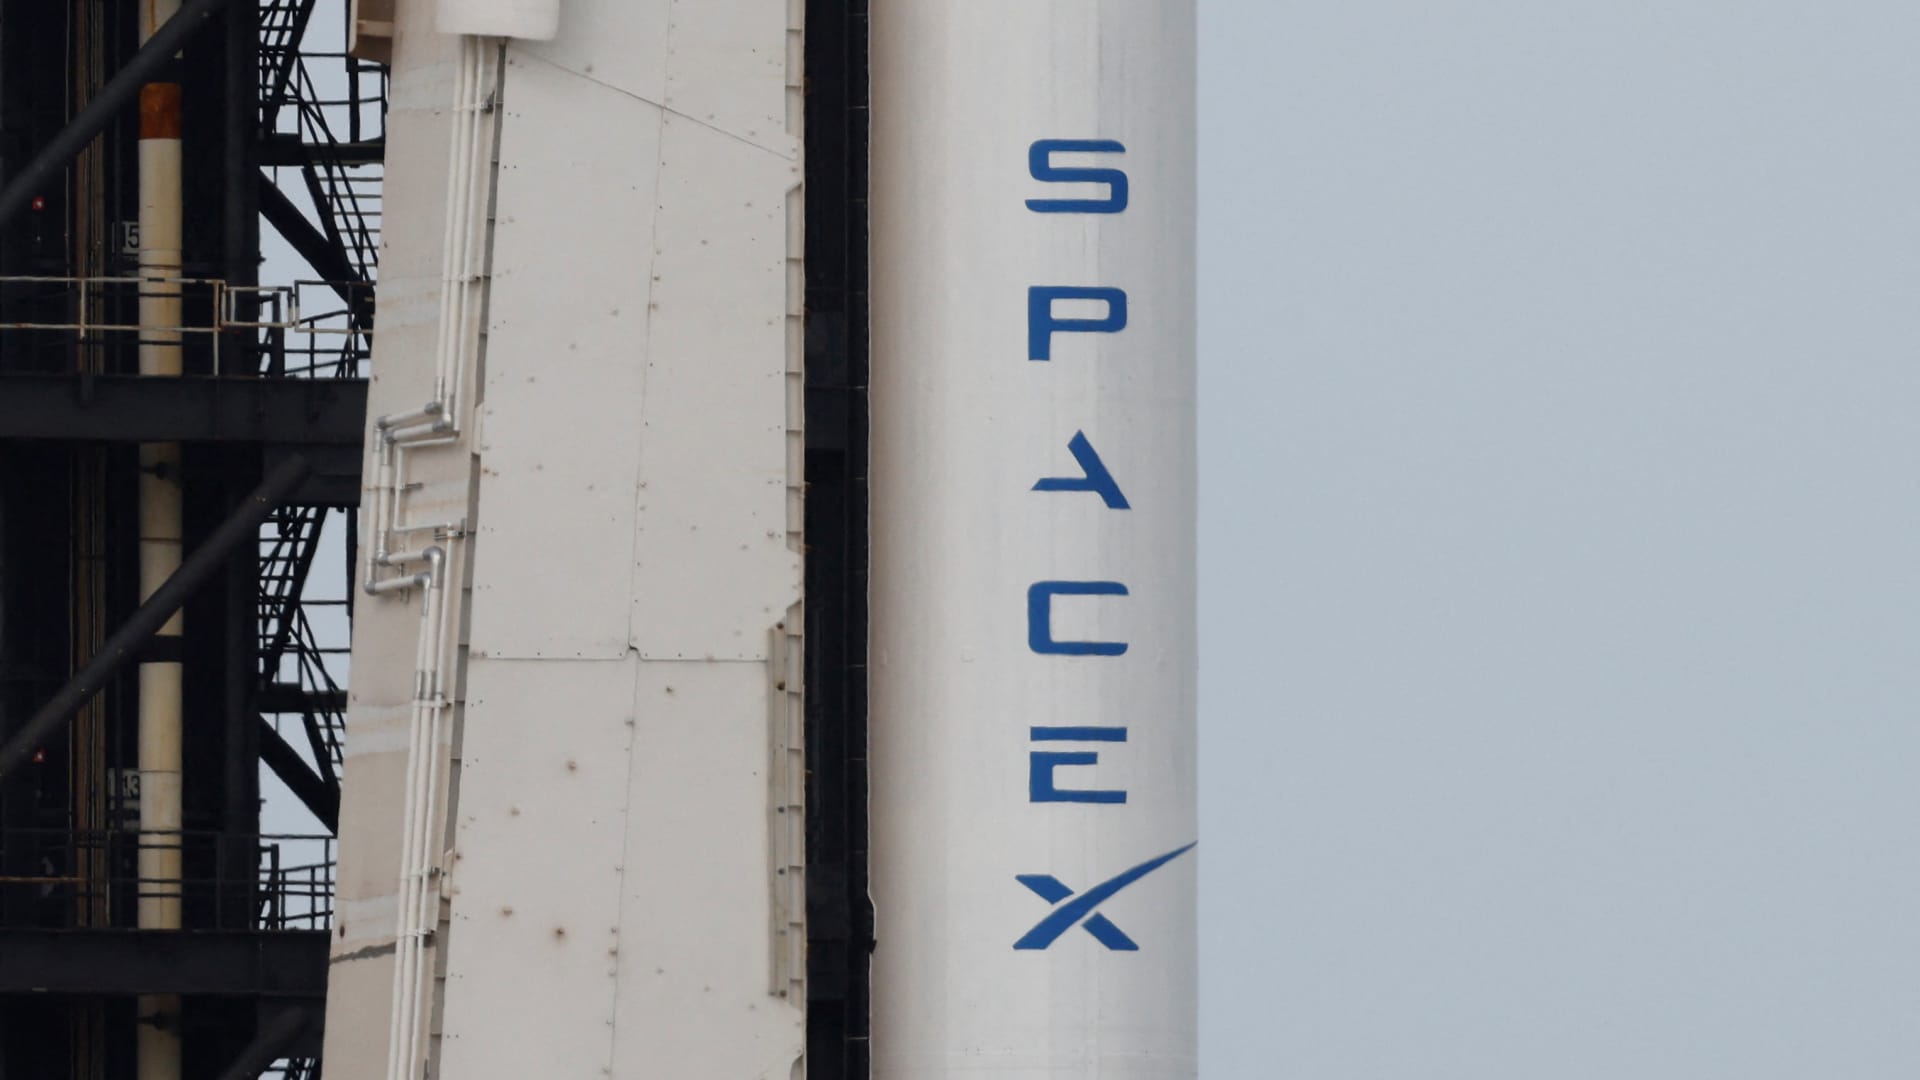 SpaceX hit with new NLRB complaint over severance agreements, dispute resolution rules